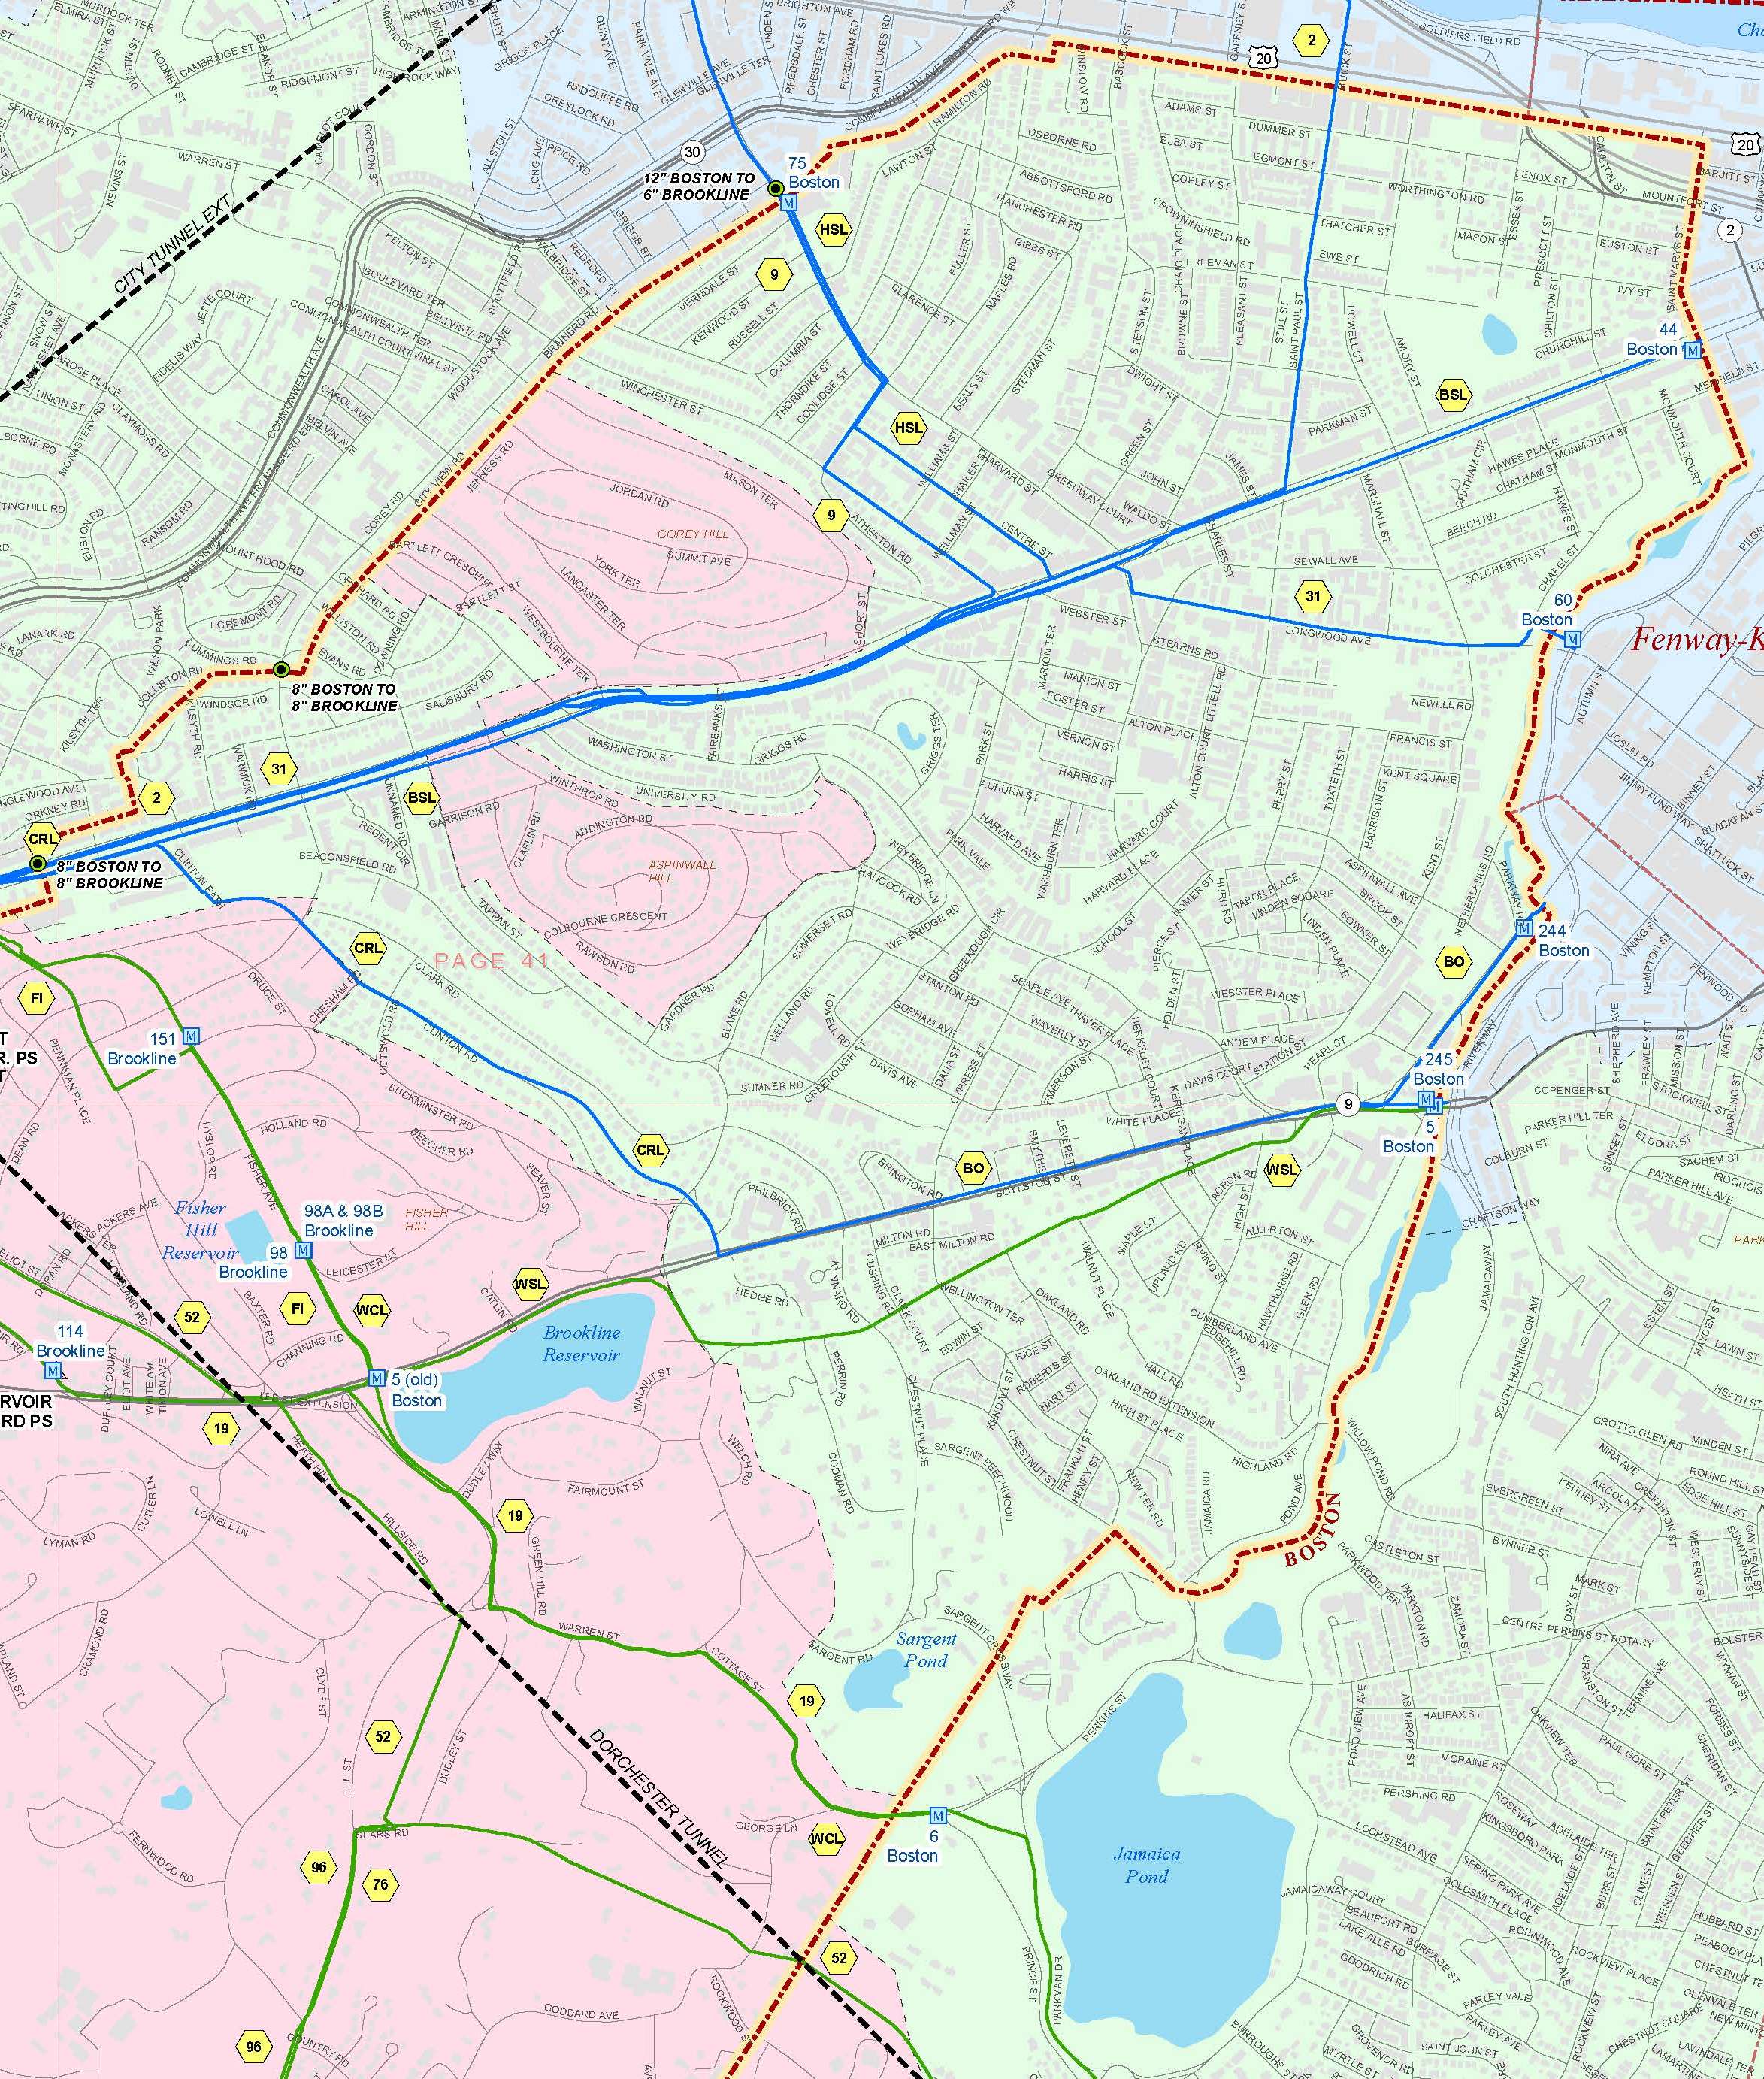 Map of area that may experience discolored water in Brookline, MA